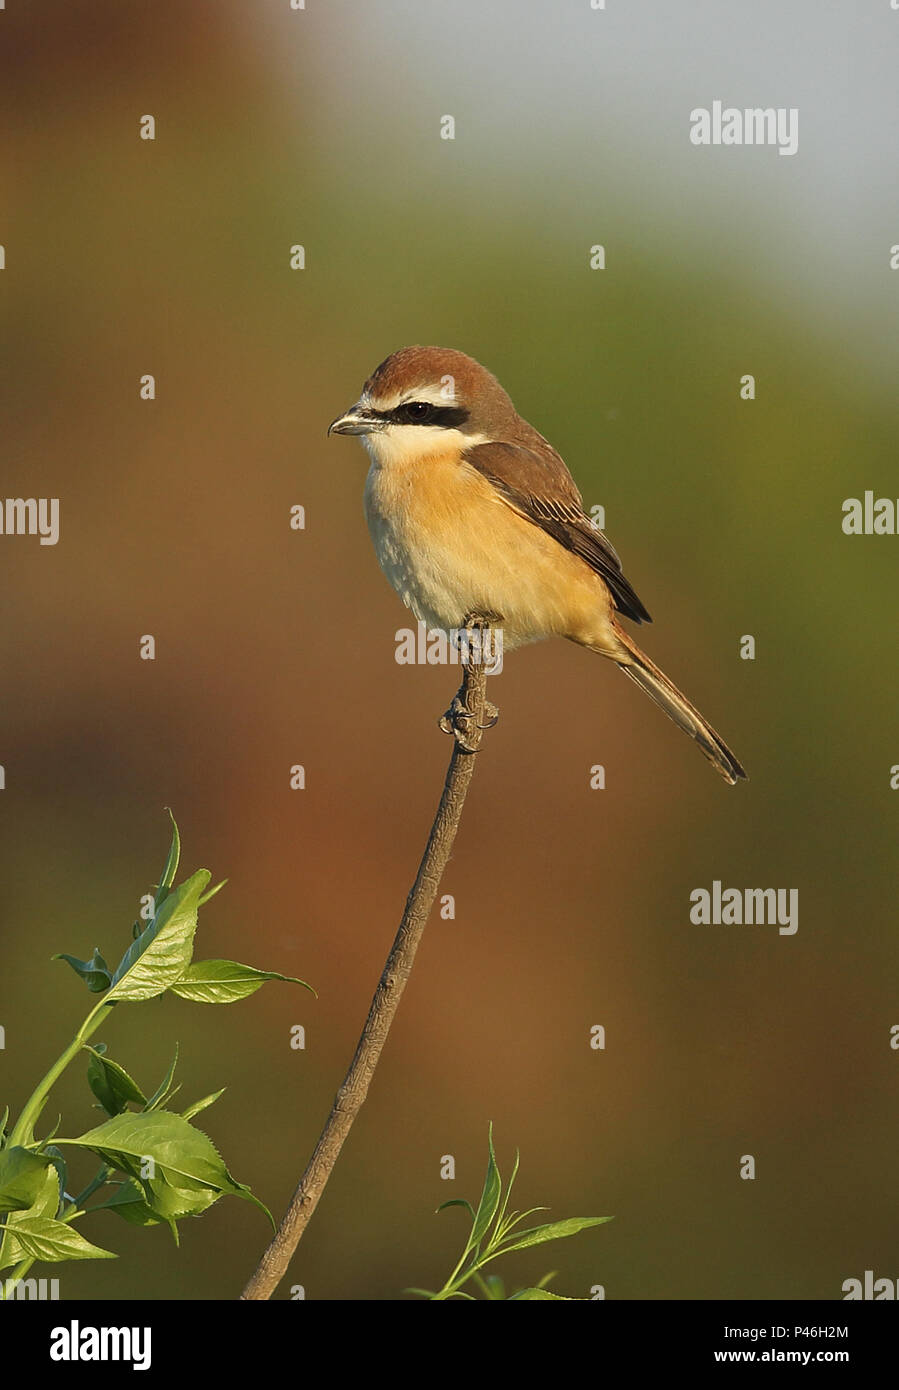 Brown Shrike (Lanius cristatus superciliosus) adult male perched on twig  Hebei, China       May 2016 Stock Photo